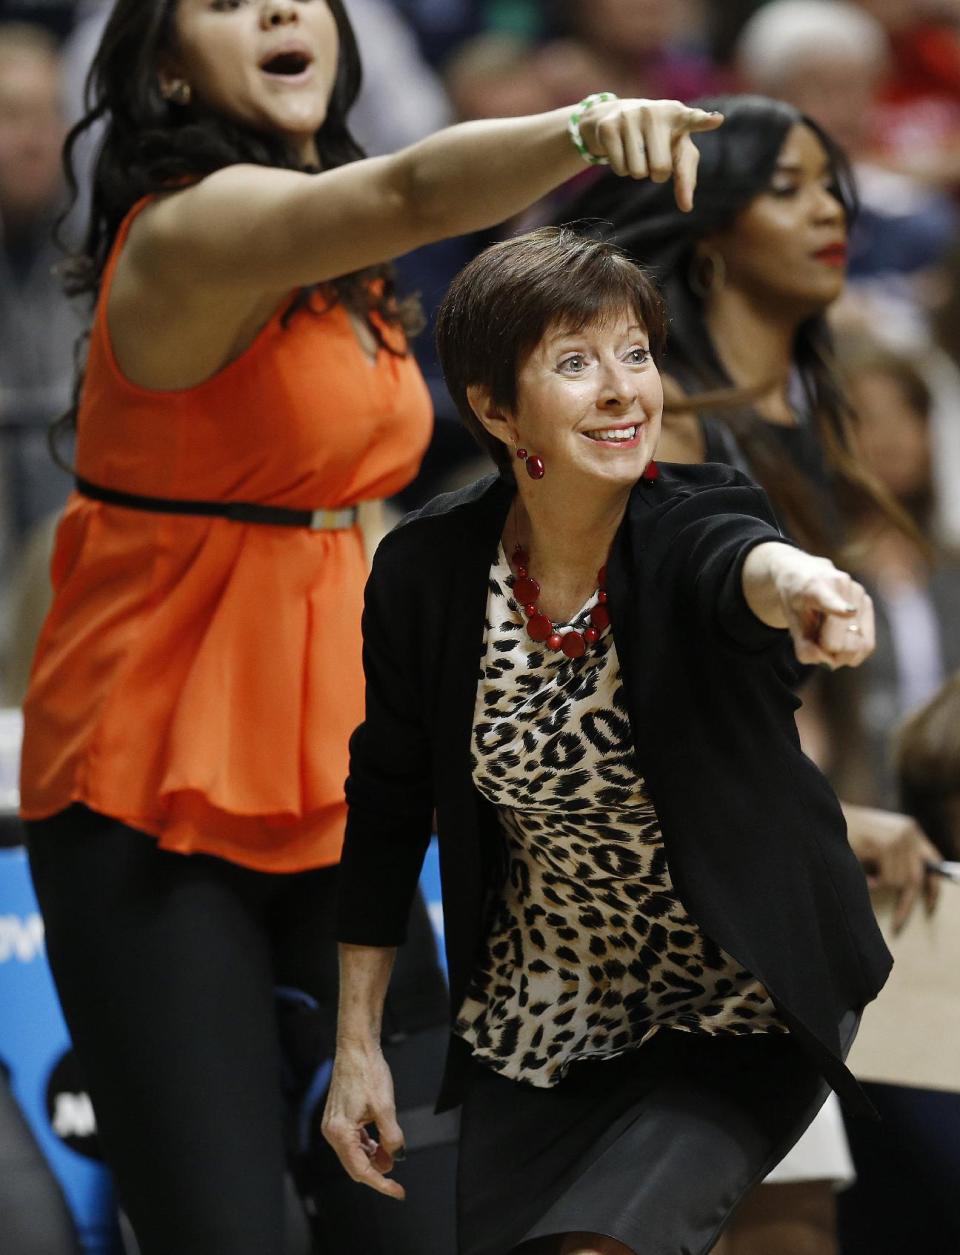 Notre Dame head coach Muffet McGraw works against Connecticut during the first half of the championship game in the Final Four of the NCAA women's college basketball tournament, Tuesday, April 8, 2014, in Nashville, Tenn. (AP Photo/Mark Humphrey)